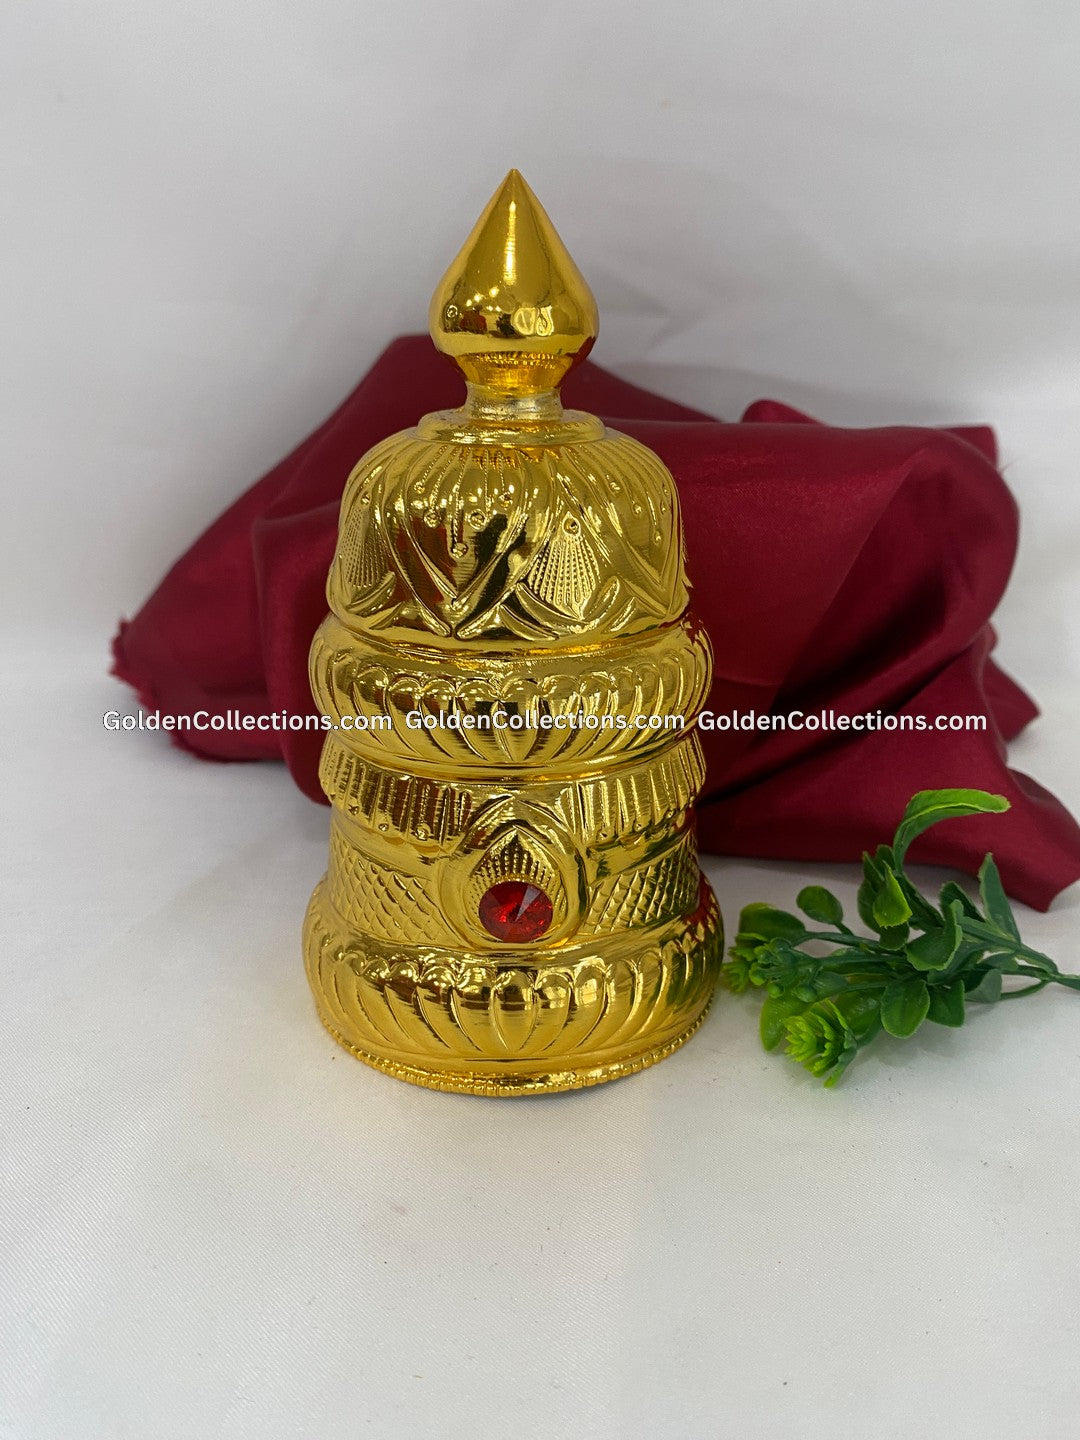 Divine Adornments for God Crown - GoldenCollections DGC-123